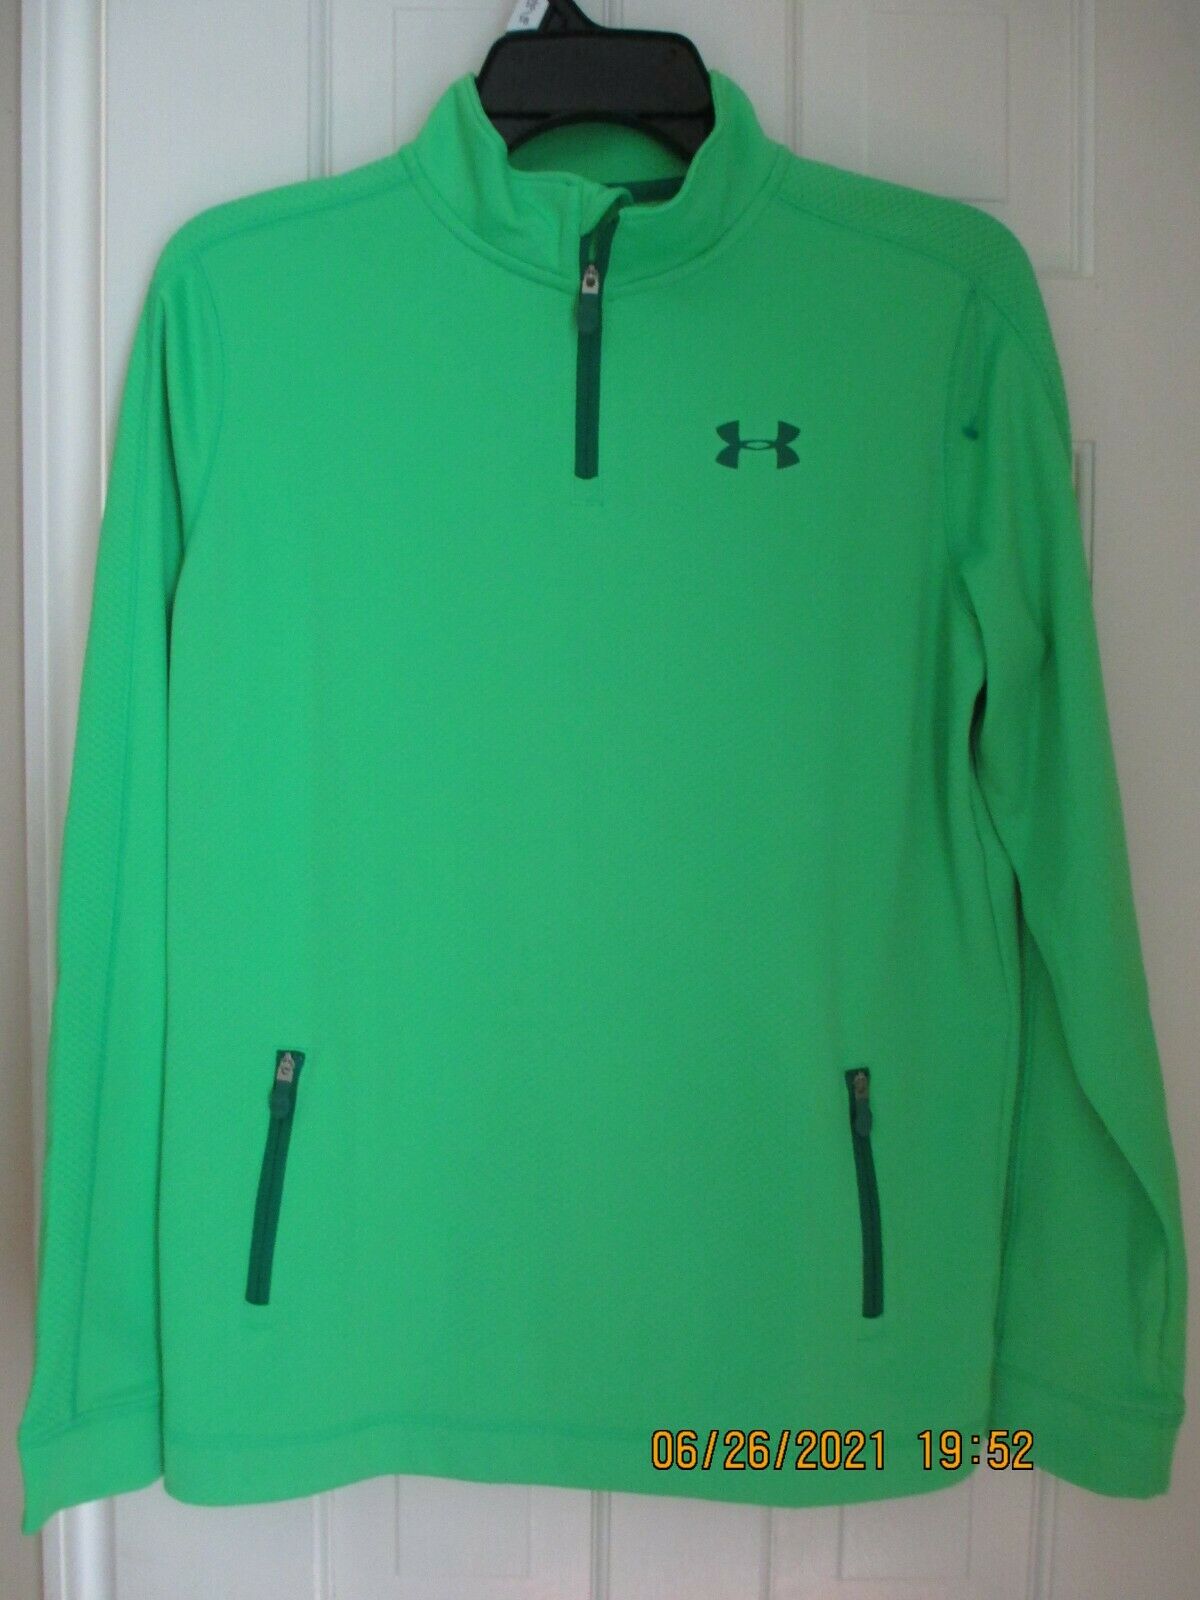 Under Armour Youth Xl Bright Green 1/4 Zipper Pullover Athletic Lightweight New